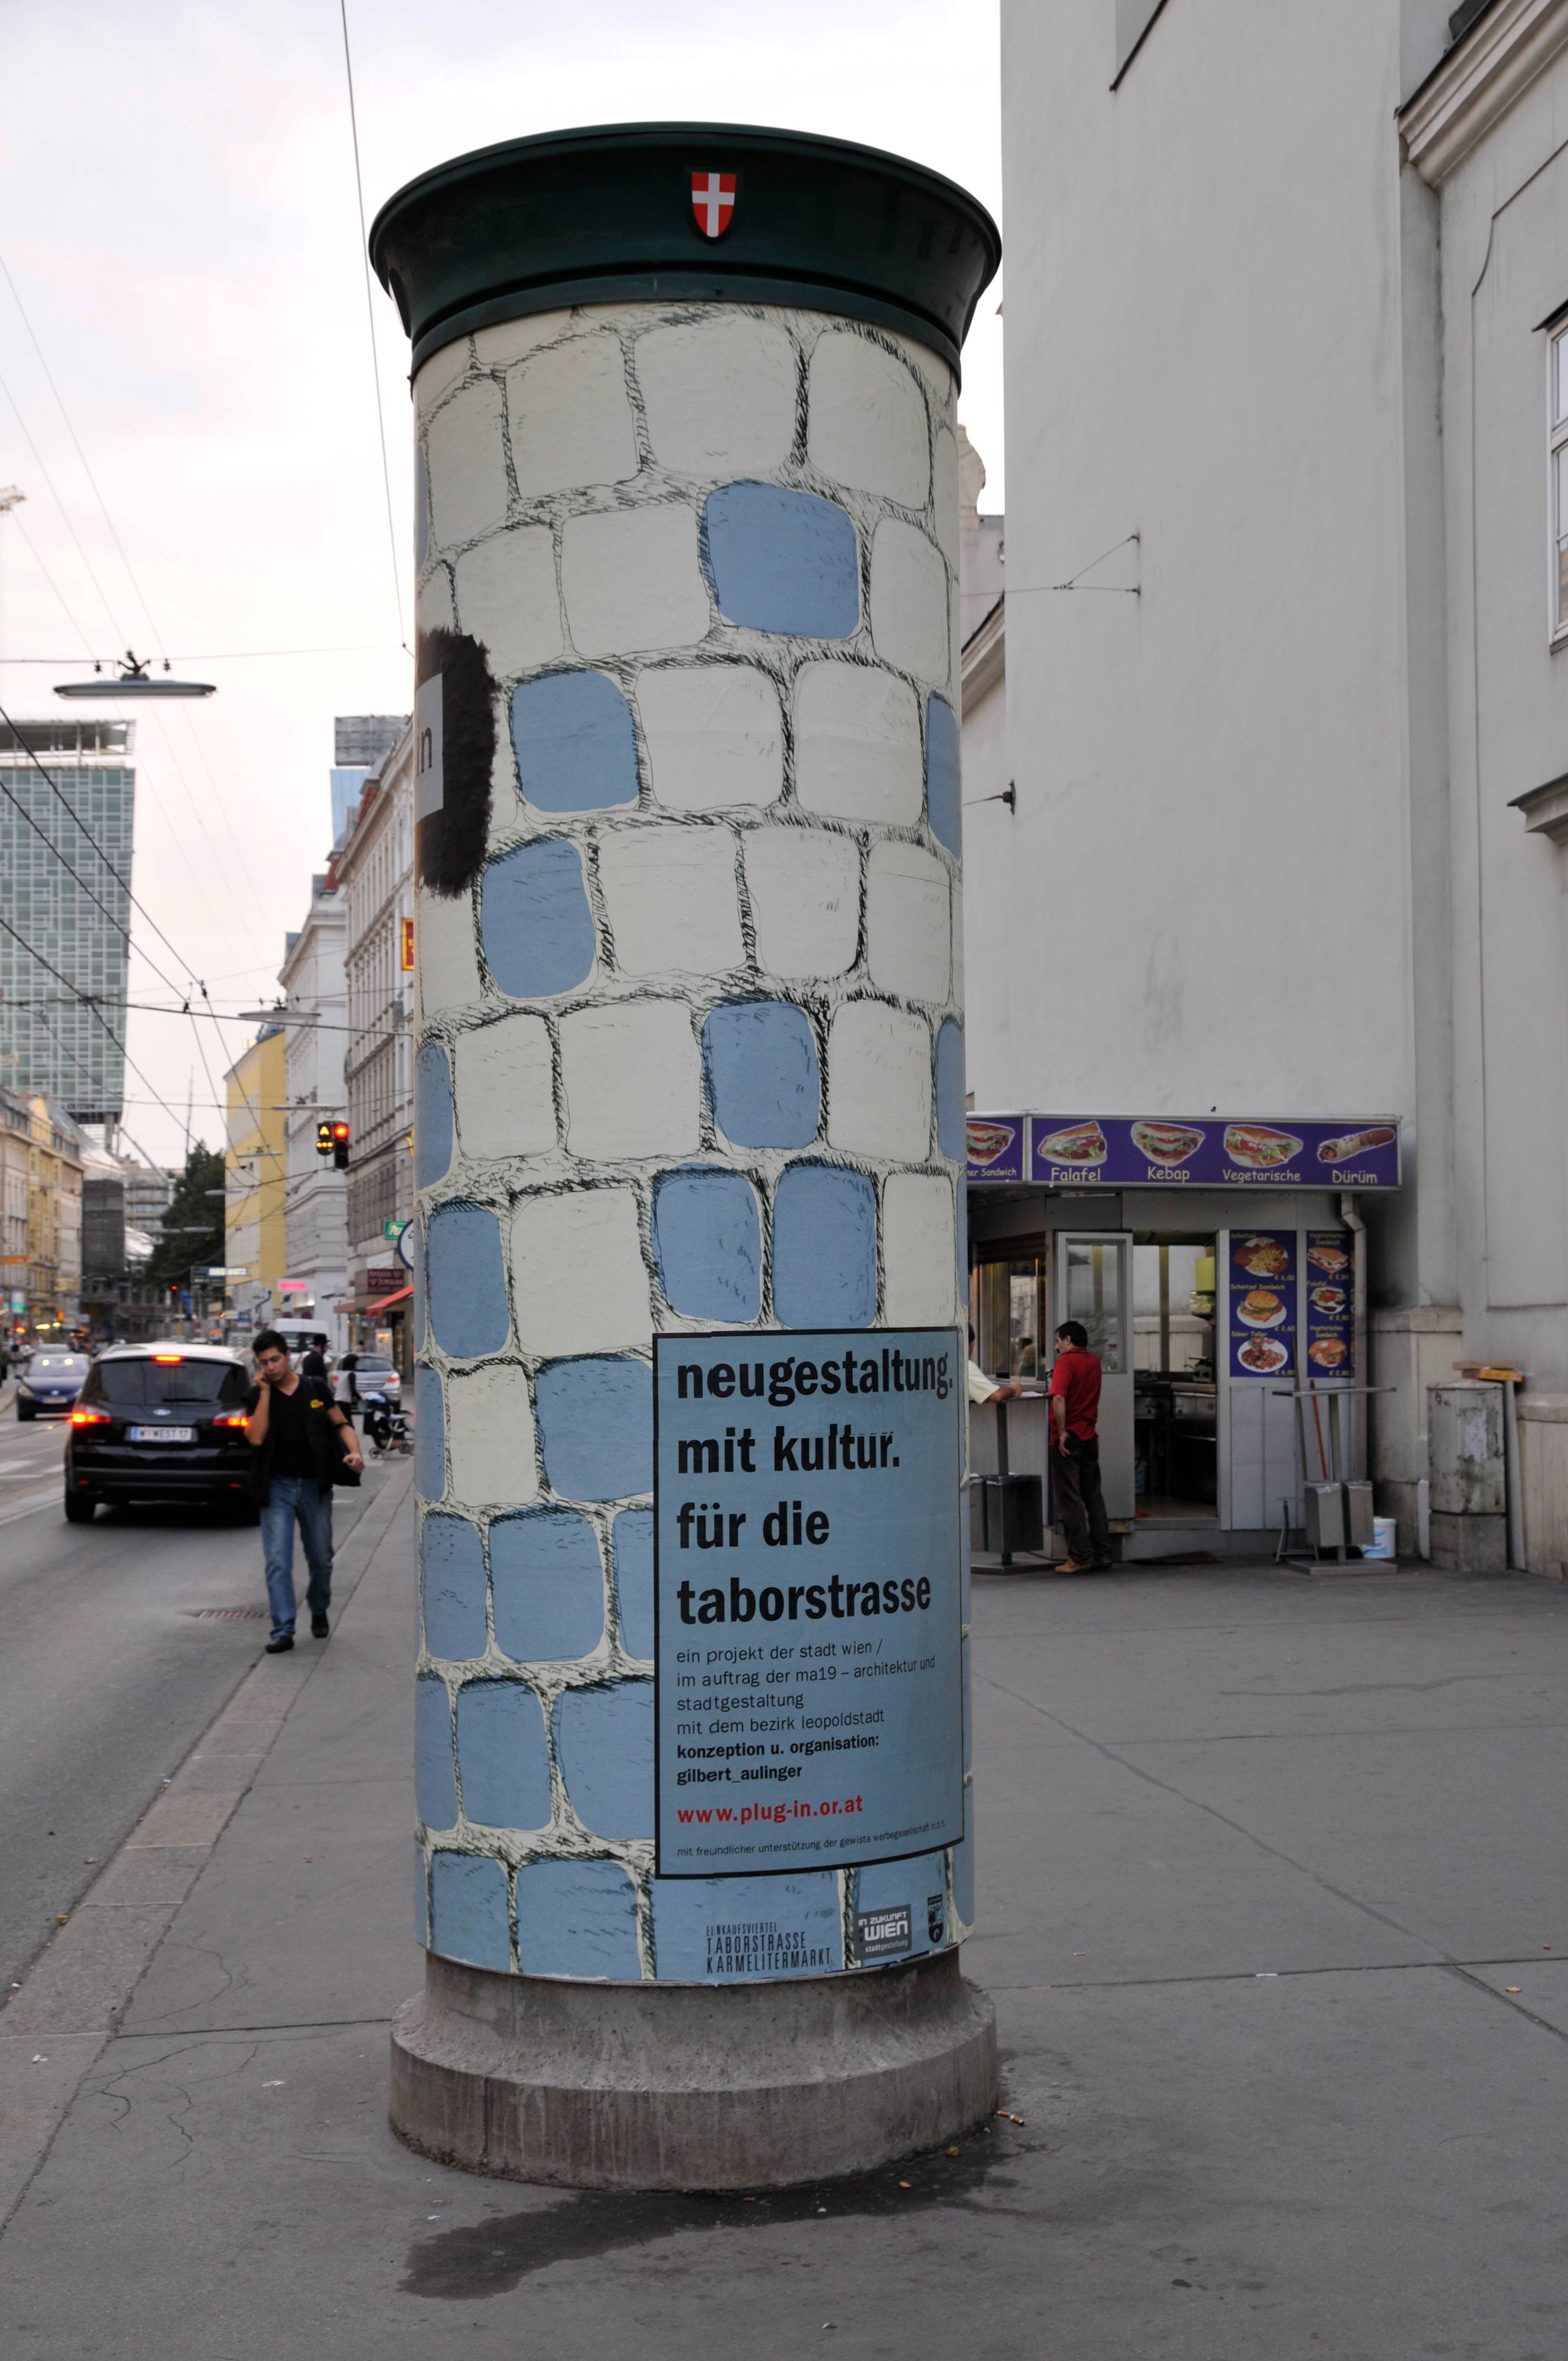 Other side of large advertising pillar. Illustrated cobblestone floor allover. Box with text overlayed.